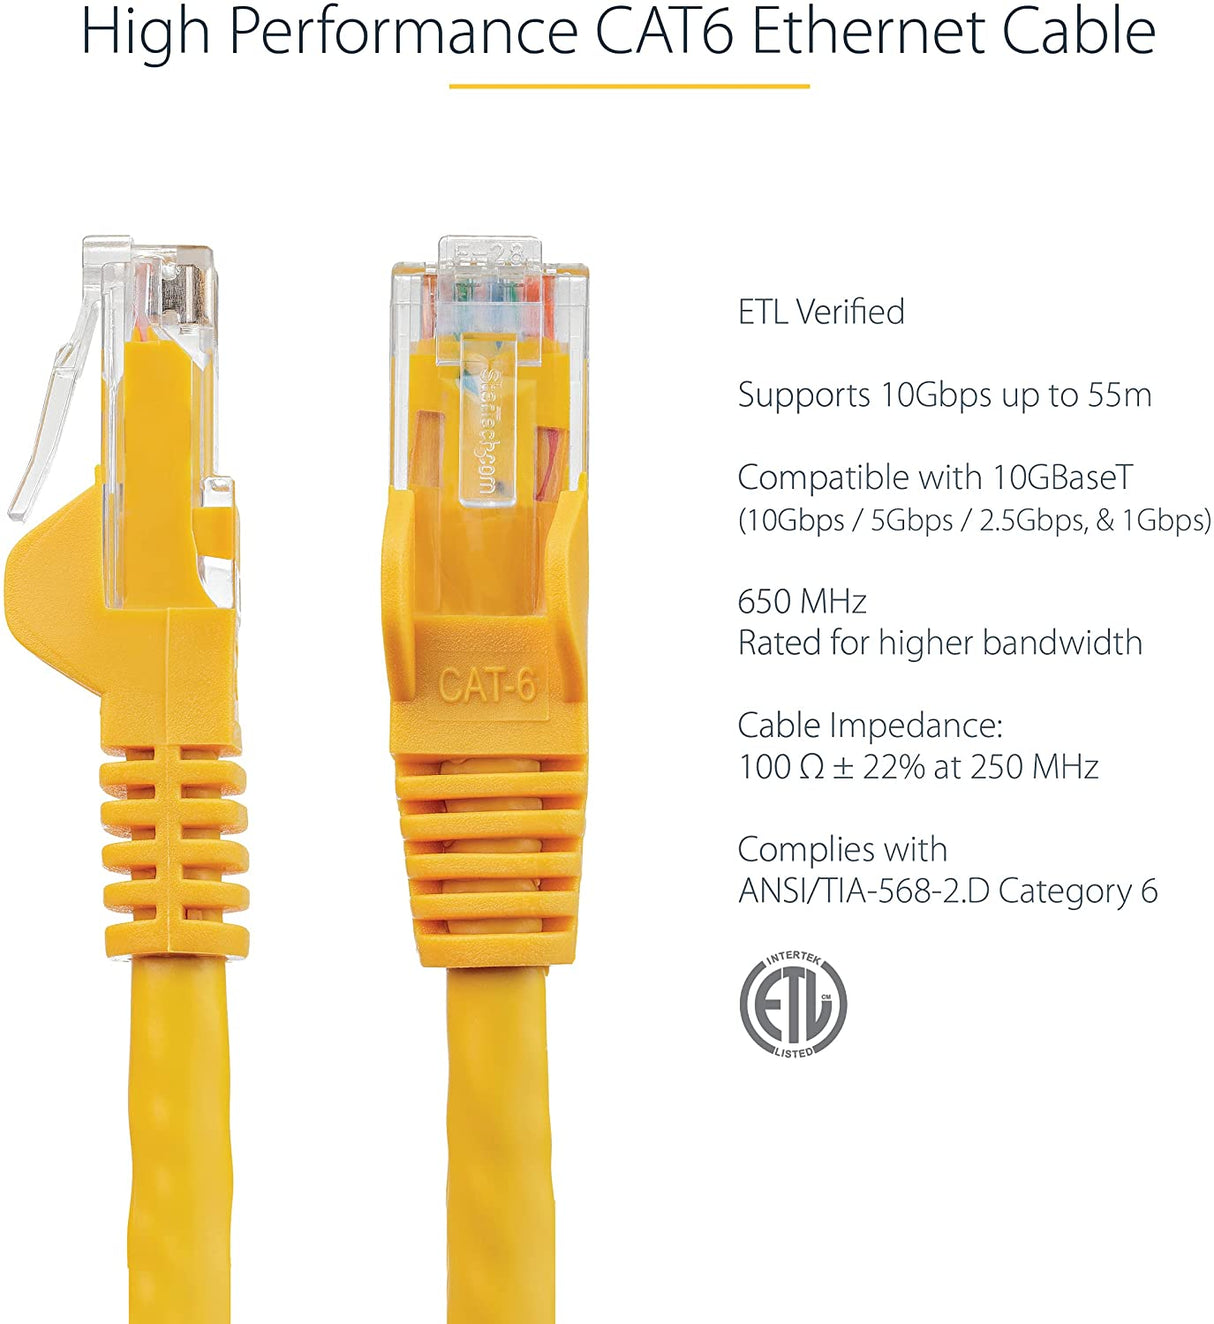 StarTech.com 35ft CAT6 Ethernet Cable - Orange CAT 6 Gigabit Ethernet Wire -650MHz 100W PoE RJ45 UTP Network/Patch Cord Snagless w/Strain Relief Fluke Tested/Wiring is UL Certified/TIA (N6PATCH35OR) Yellow 35 ft / 10.6 m 1 Pack